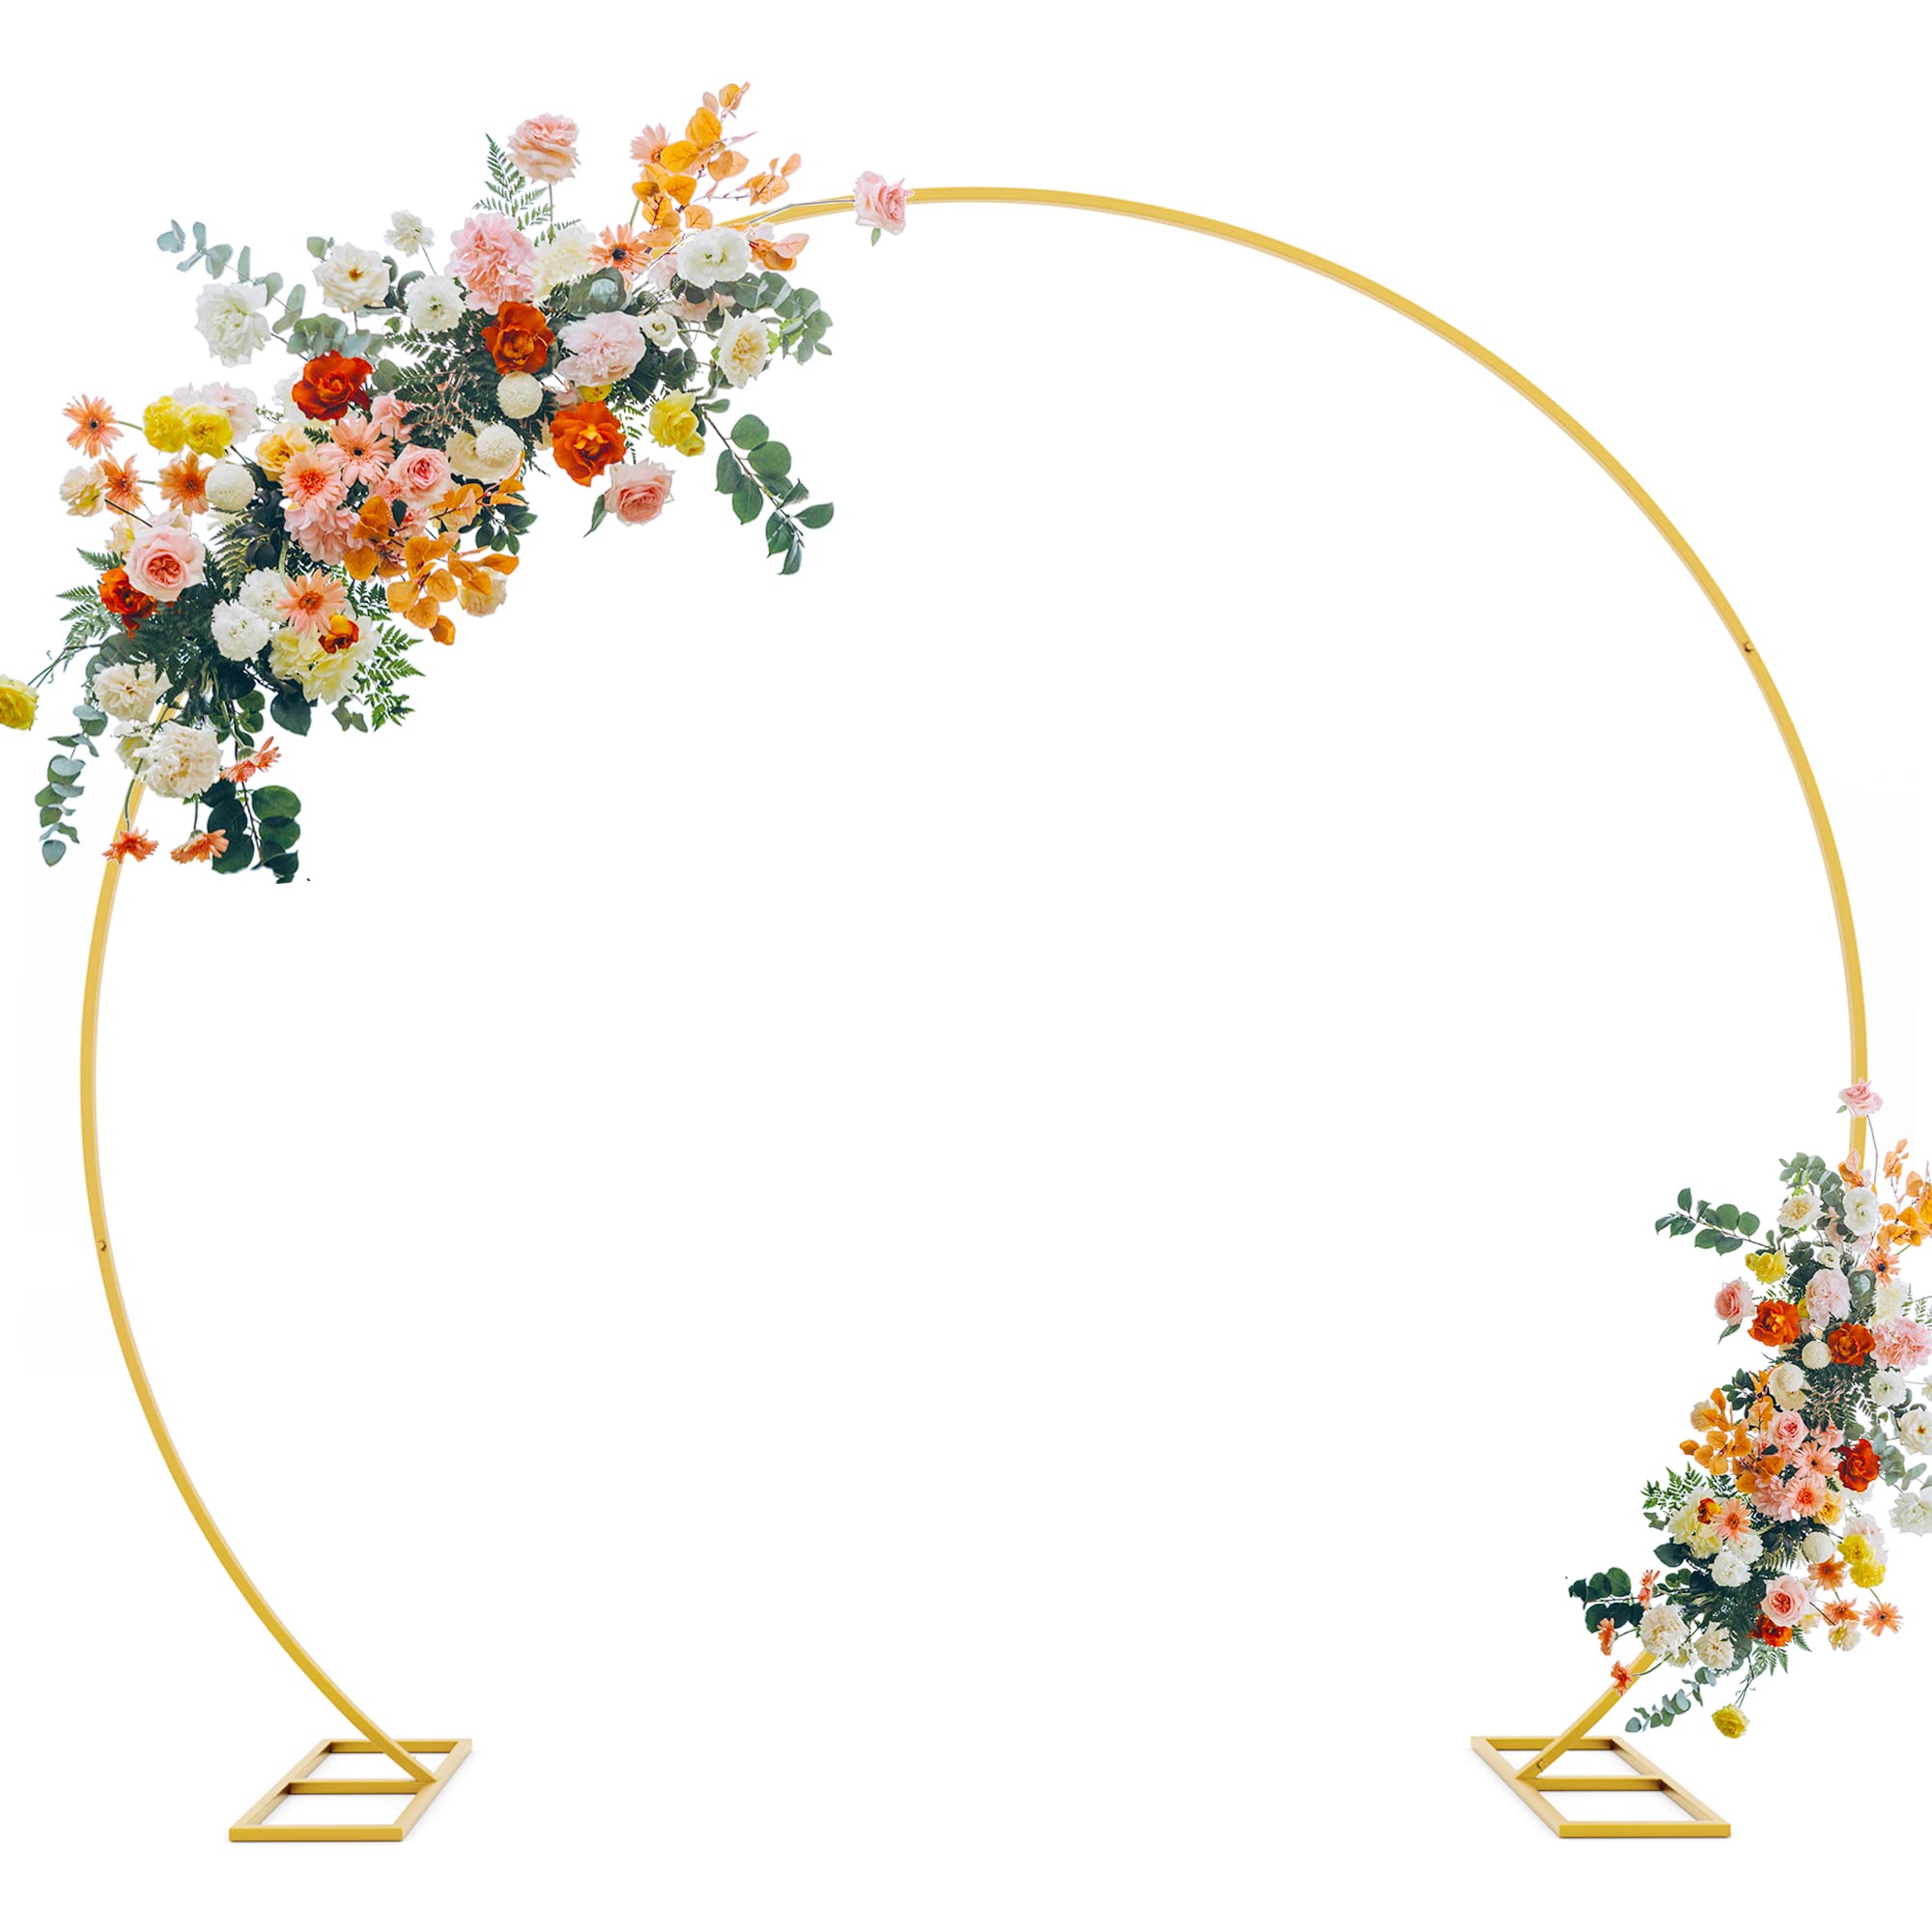 Fomcet 7.2FT Gold Round Backdrop Stand Metal Circle Balloon Arch Frame Large Wedding Arch Stand for Birthday Party Anniversary Valentine Wedding Ceremony Decorations Thickened Square Tubes